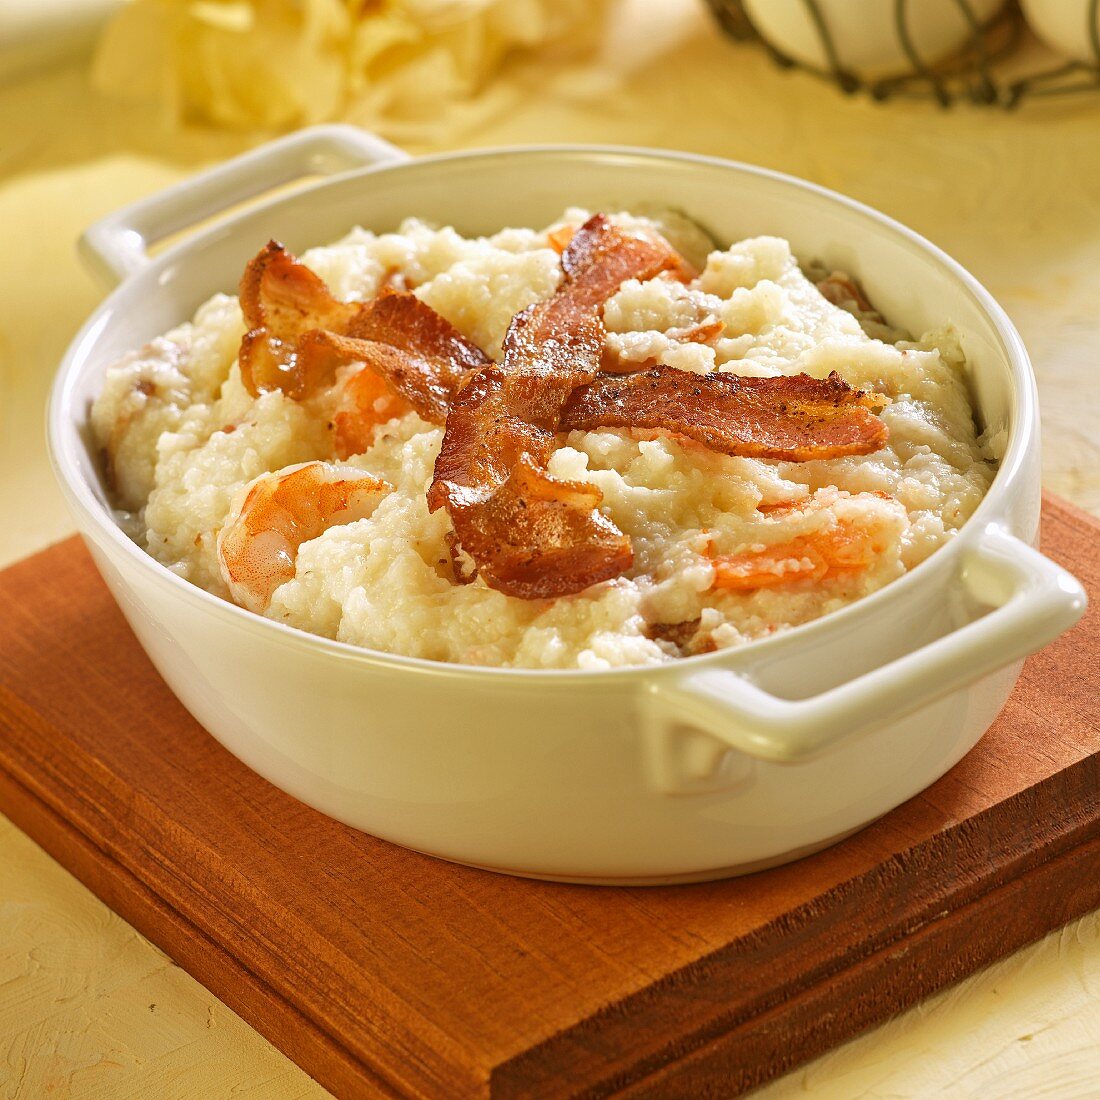 Shrimps and grits with bacon (USA)